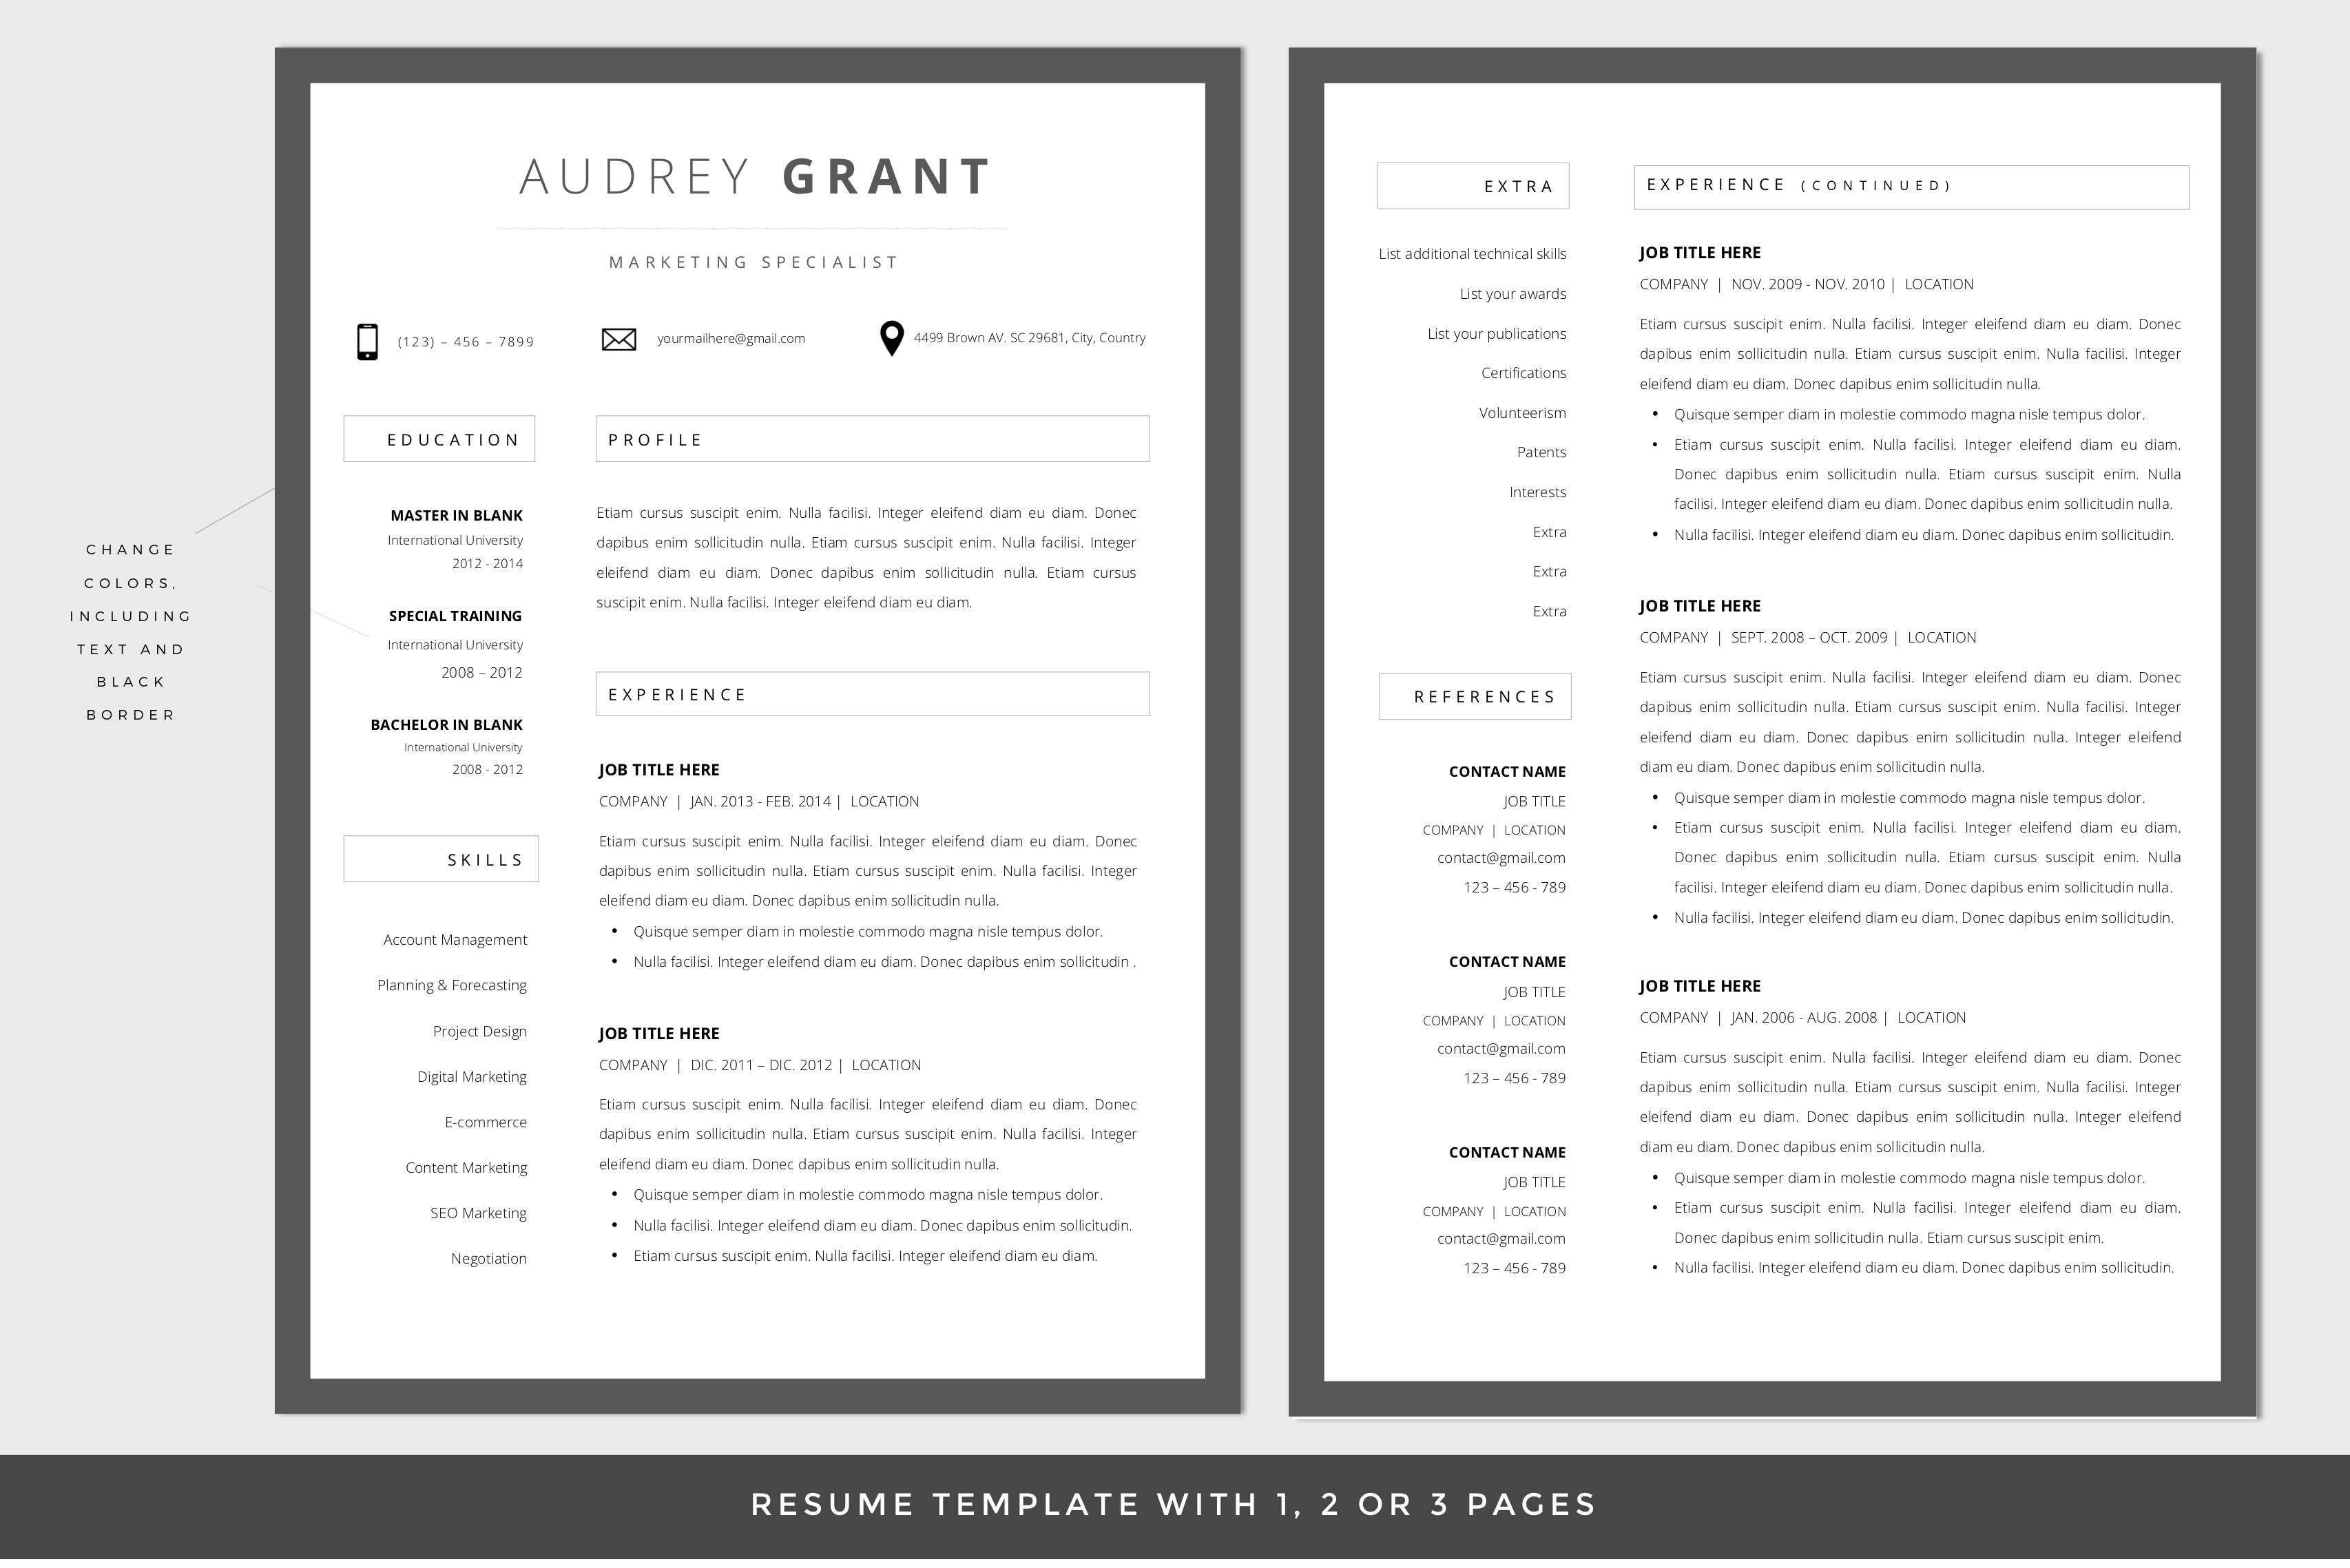 RESUME CV TEMPLATE WORD preview image.